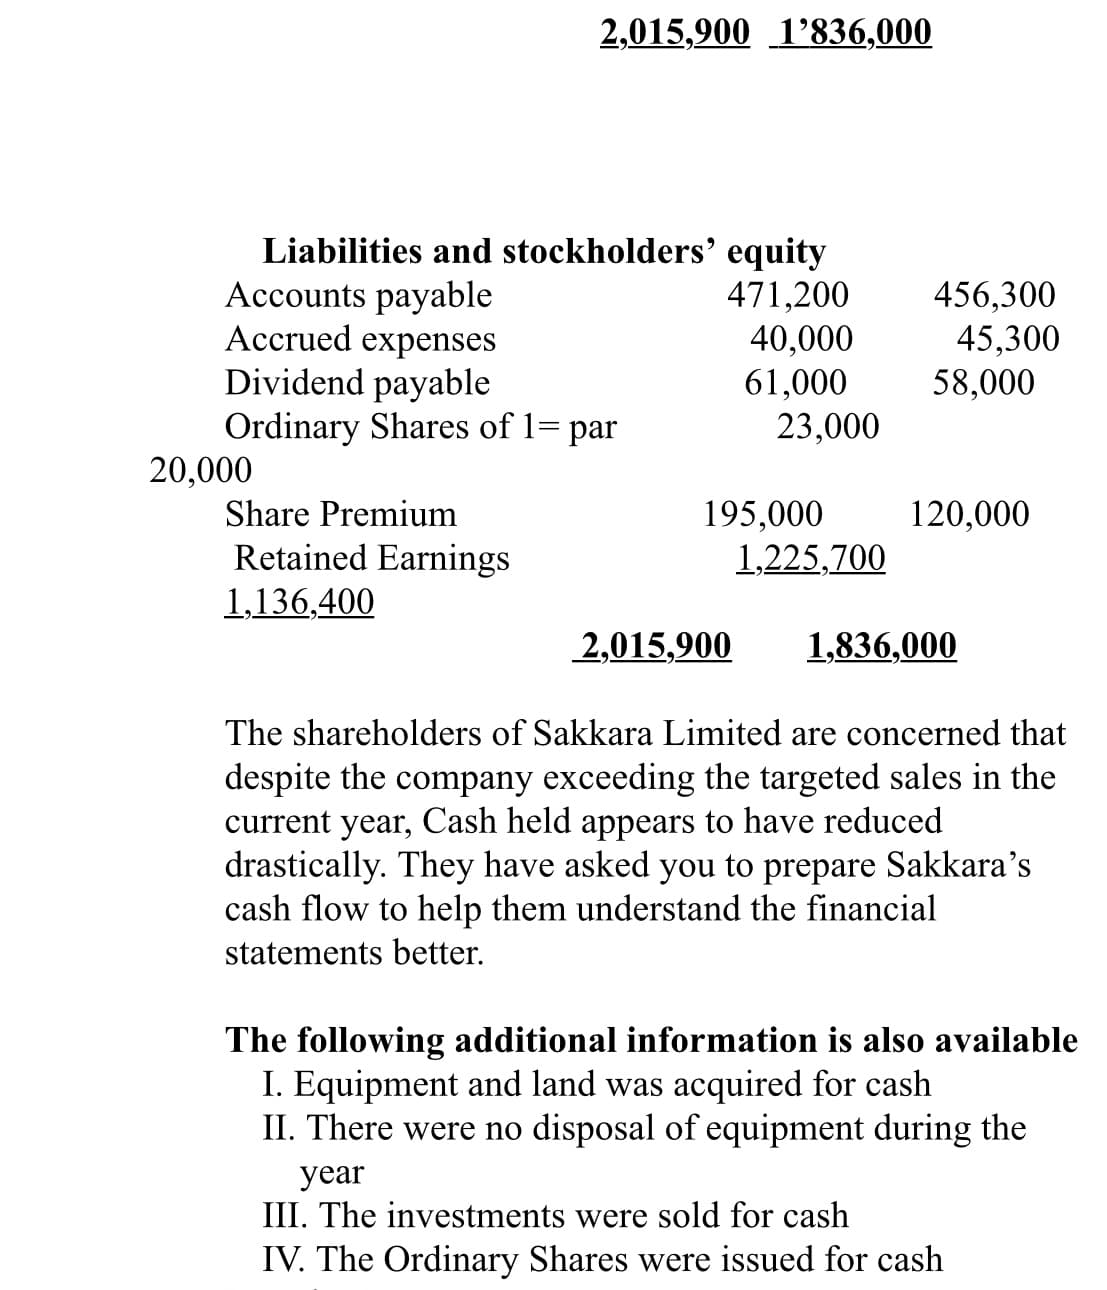 2,015,900 1'836,000
Liabilities and stockholders' equity
Accounts payable
Accrued expenses
Dividend payable
Ordinary Shares of 1= par
20,000
471,200
40,000
61,000
23,000
456,300
45,300
58,000
Share Premium
120,000
195,000
1,225,700
Retained Earnings
1,136,400
2,015,900
1,836,000
The shareholders of Sakkara Limited are concerned that
despite the company exceeding the targeted sales in the
current year, Cash held appears to have reduced
drastically. They have asked you to prepare Sakkara's
cash flow to help them understand the financial
statements better.
The following additional information is also available
I. Equipment and land was acquired for cash
II. There were no disposal of equipment during the
year
III. The investments were sold for cash
IV. The Ordinary Shares were issued for cash
